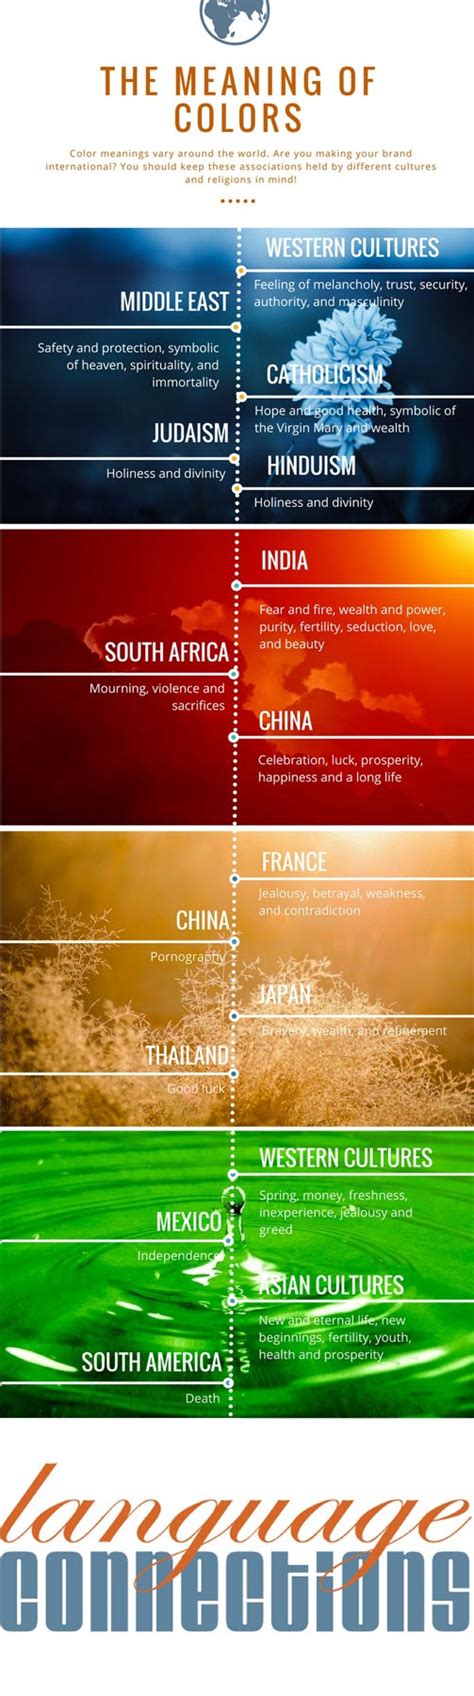 Infographic: Localizing for Color Meanings | Language Connections